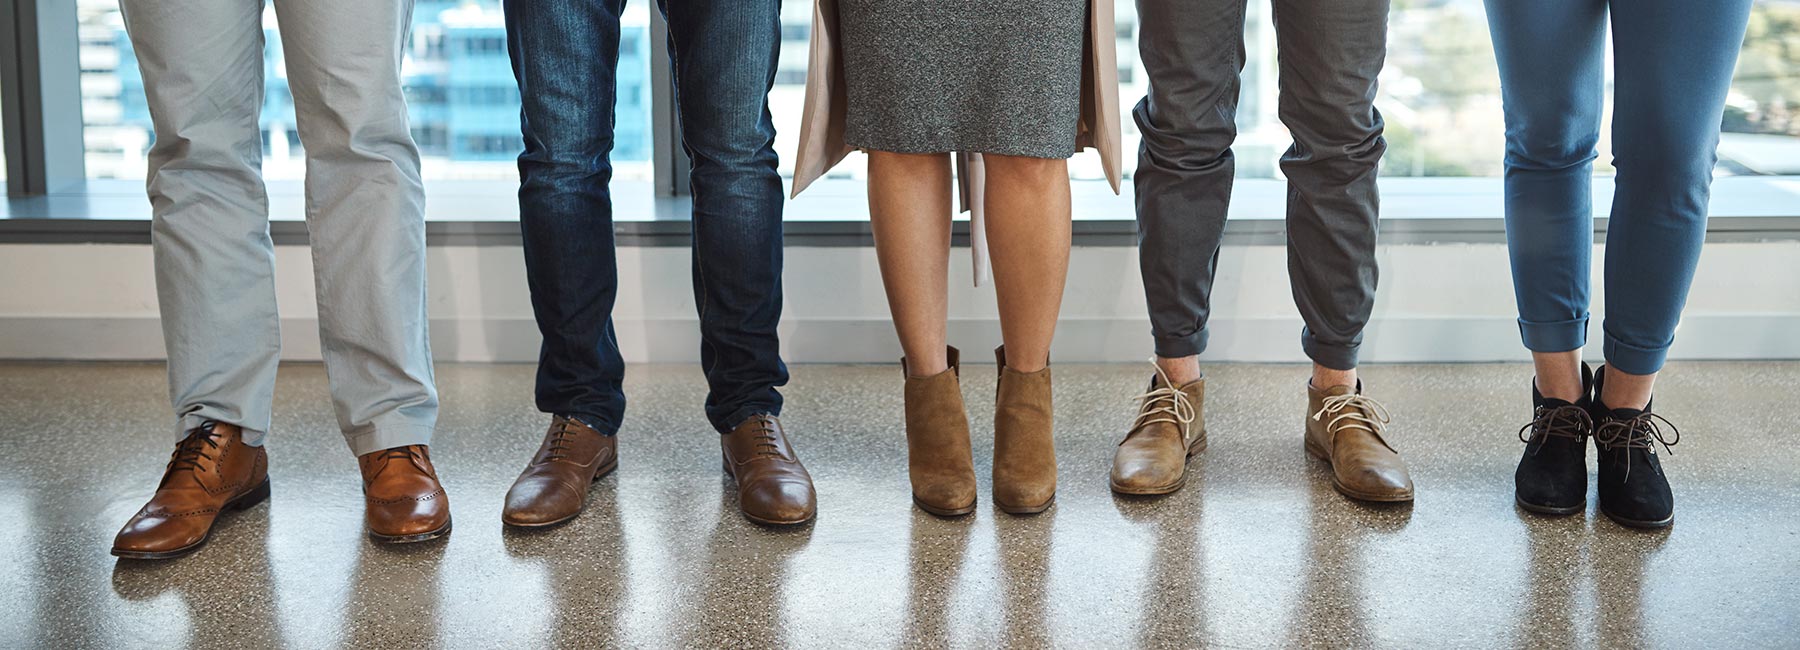 Five pairs of feet standing in an office